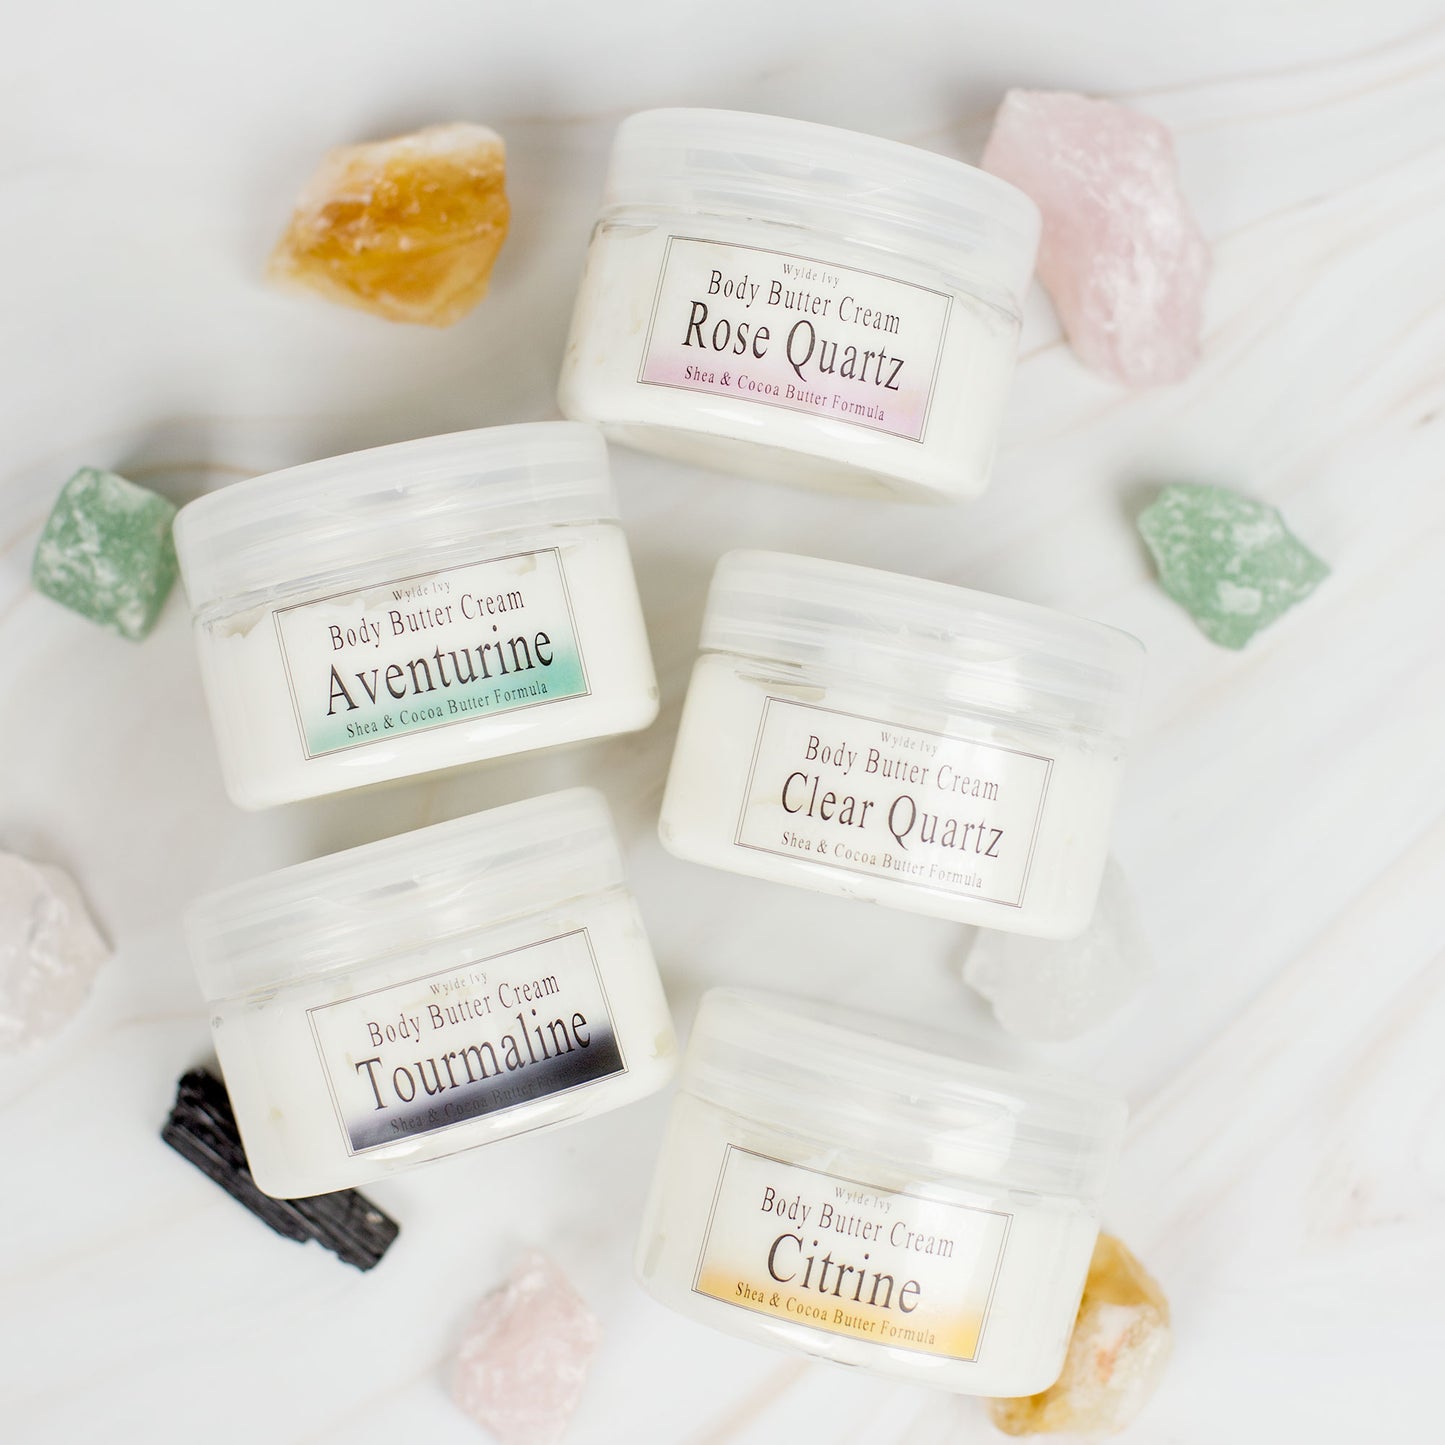 The Crystal Collection Body Butter Cream